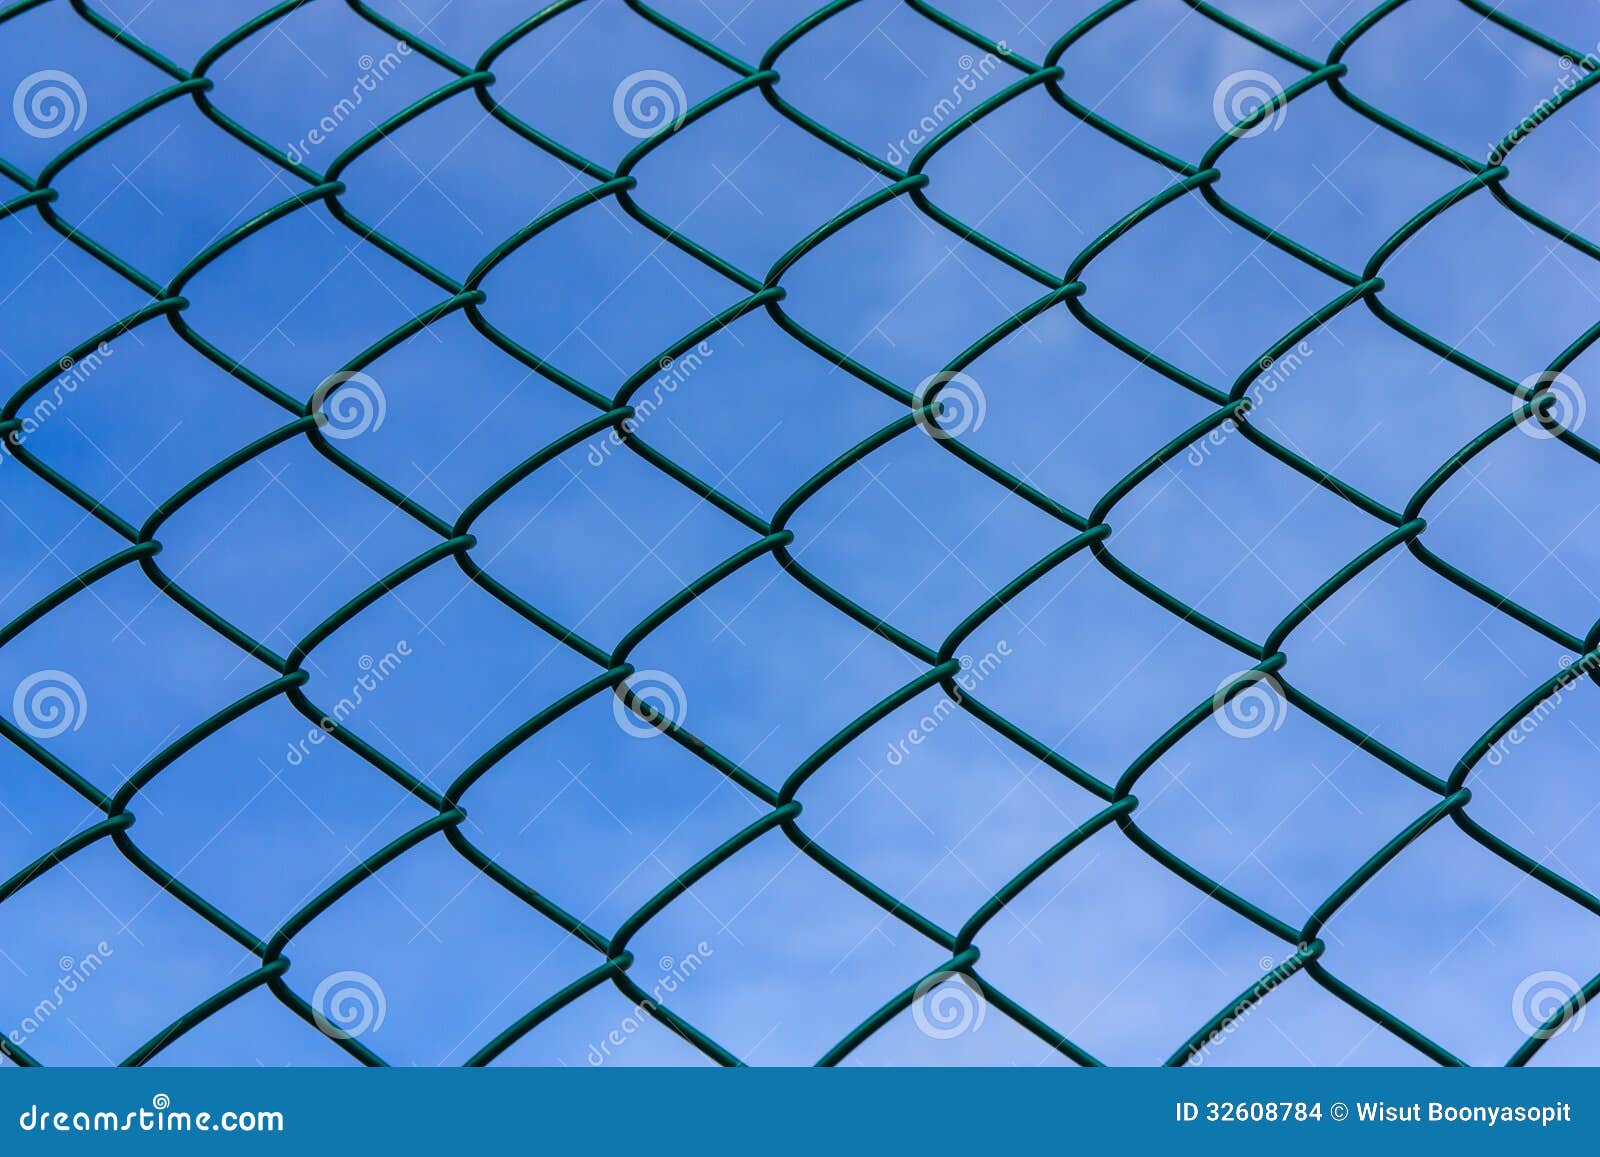 Metallic net with blue sky stock photo. Image of chain - 32608784
